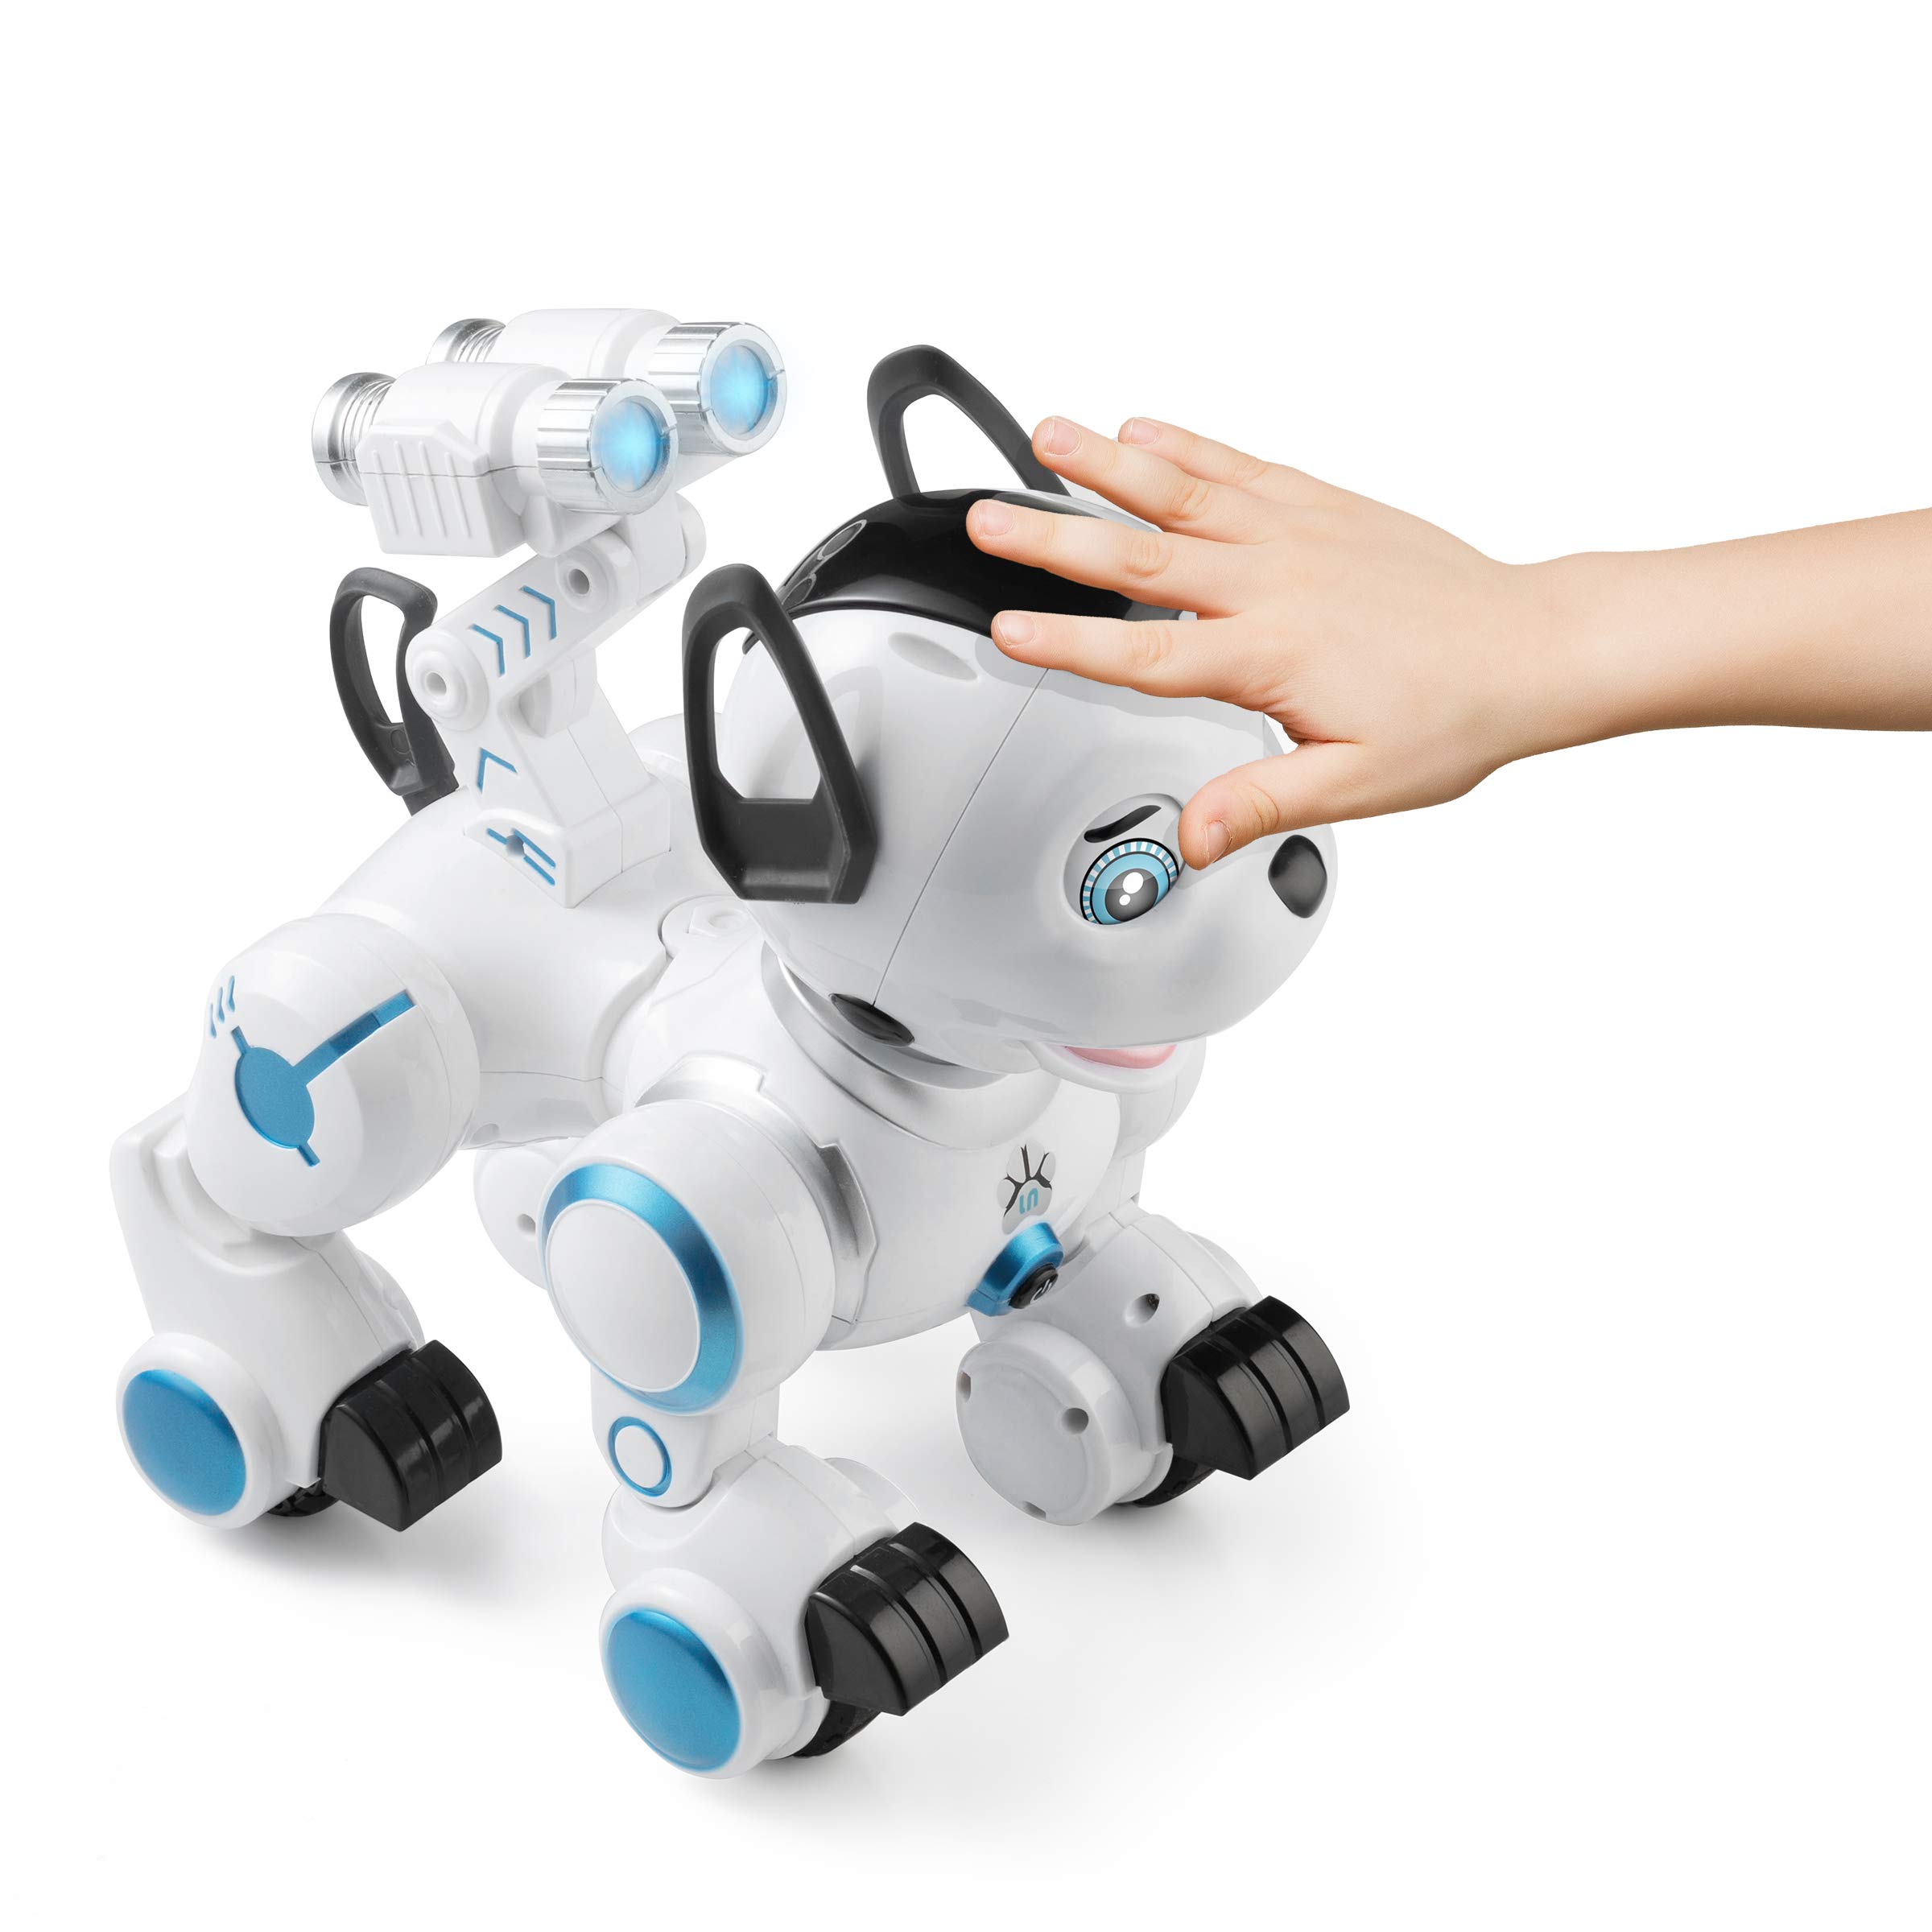 Remote Control Robot Dog Robotic Dog RC Interactive Dog Toy for Kids - Walking Dancing Programmable Smart Robot Puppy Toys - Electronic Pets with Light and Sound for Kids Boys & Girls